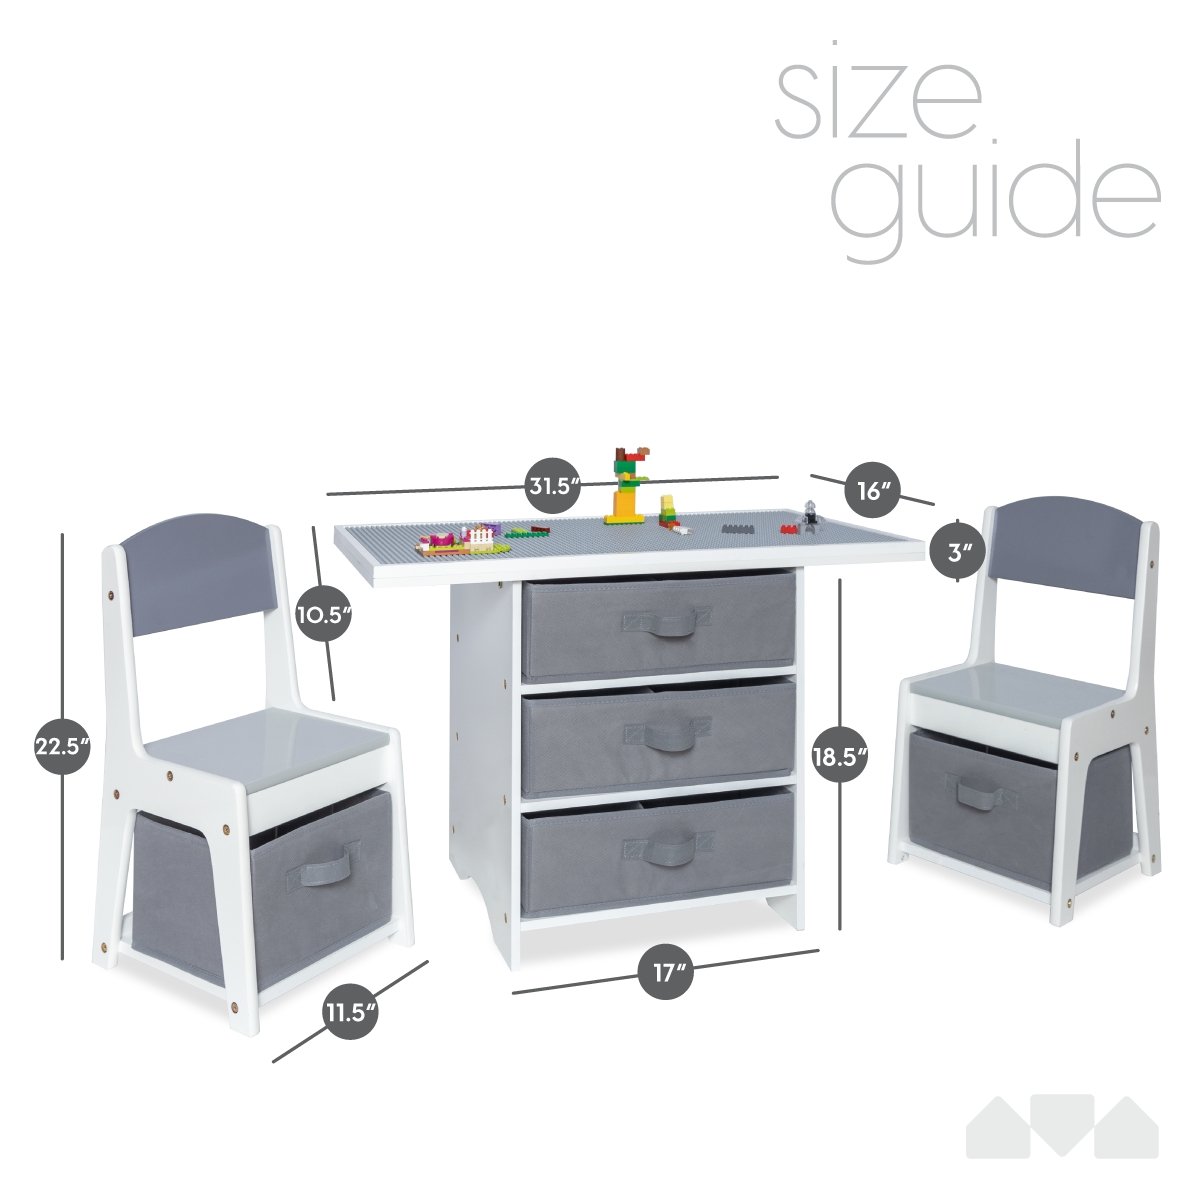 with Play | Kids 3-in-1 Milliard Play Table Bedding Storage Table